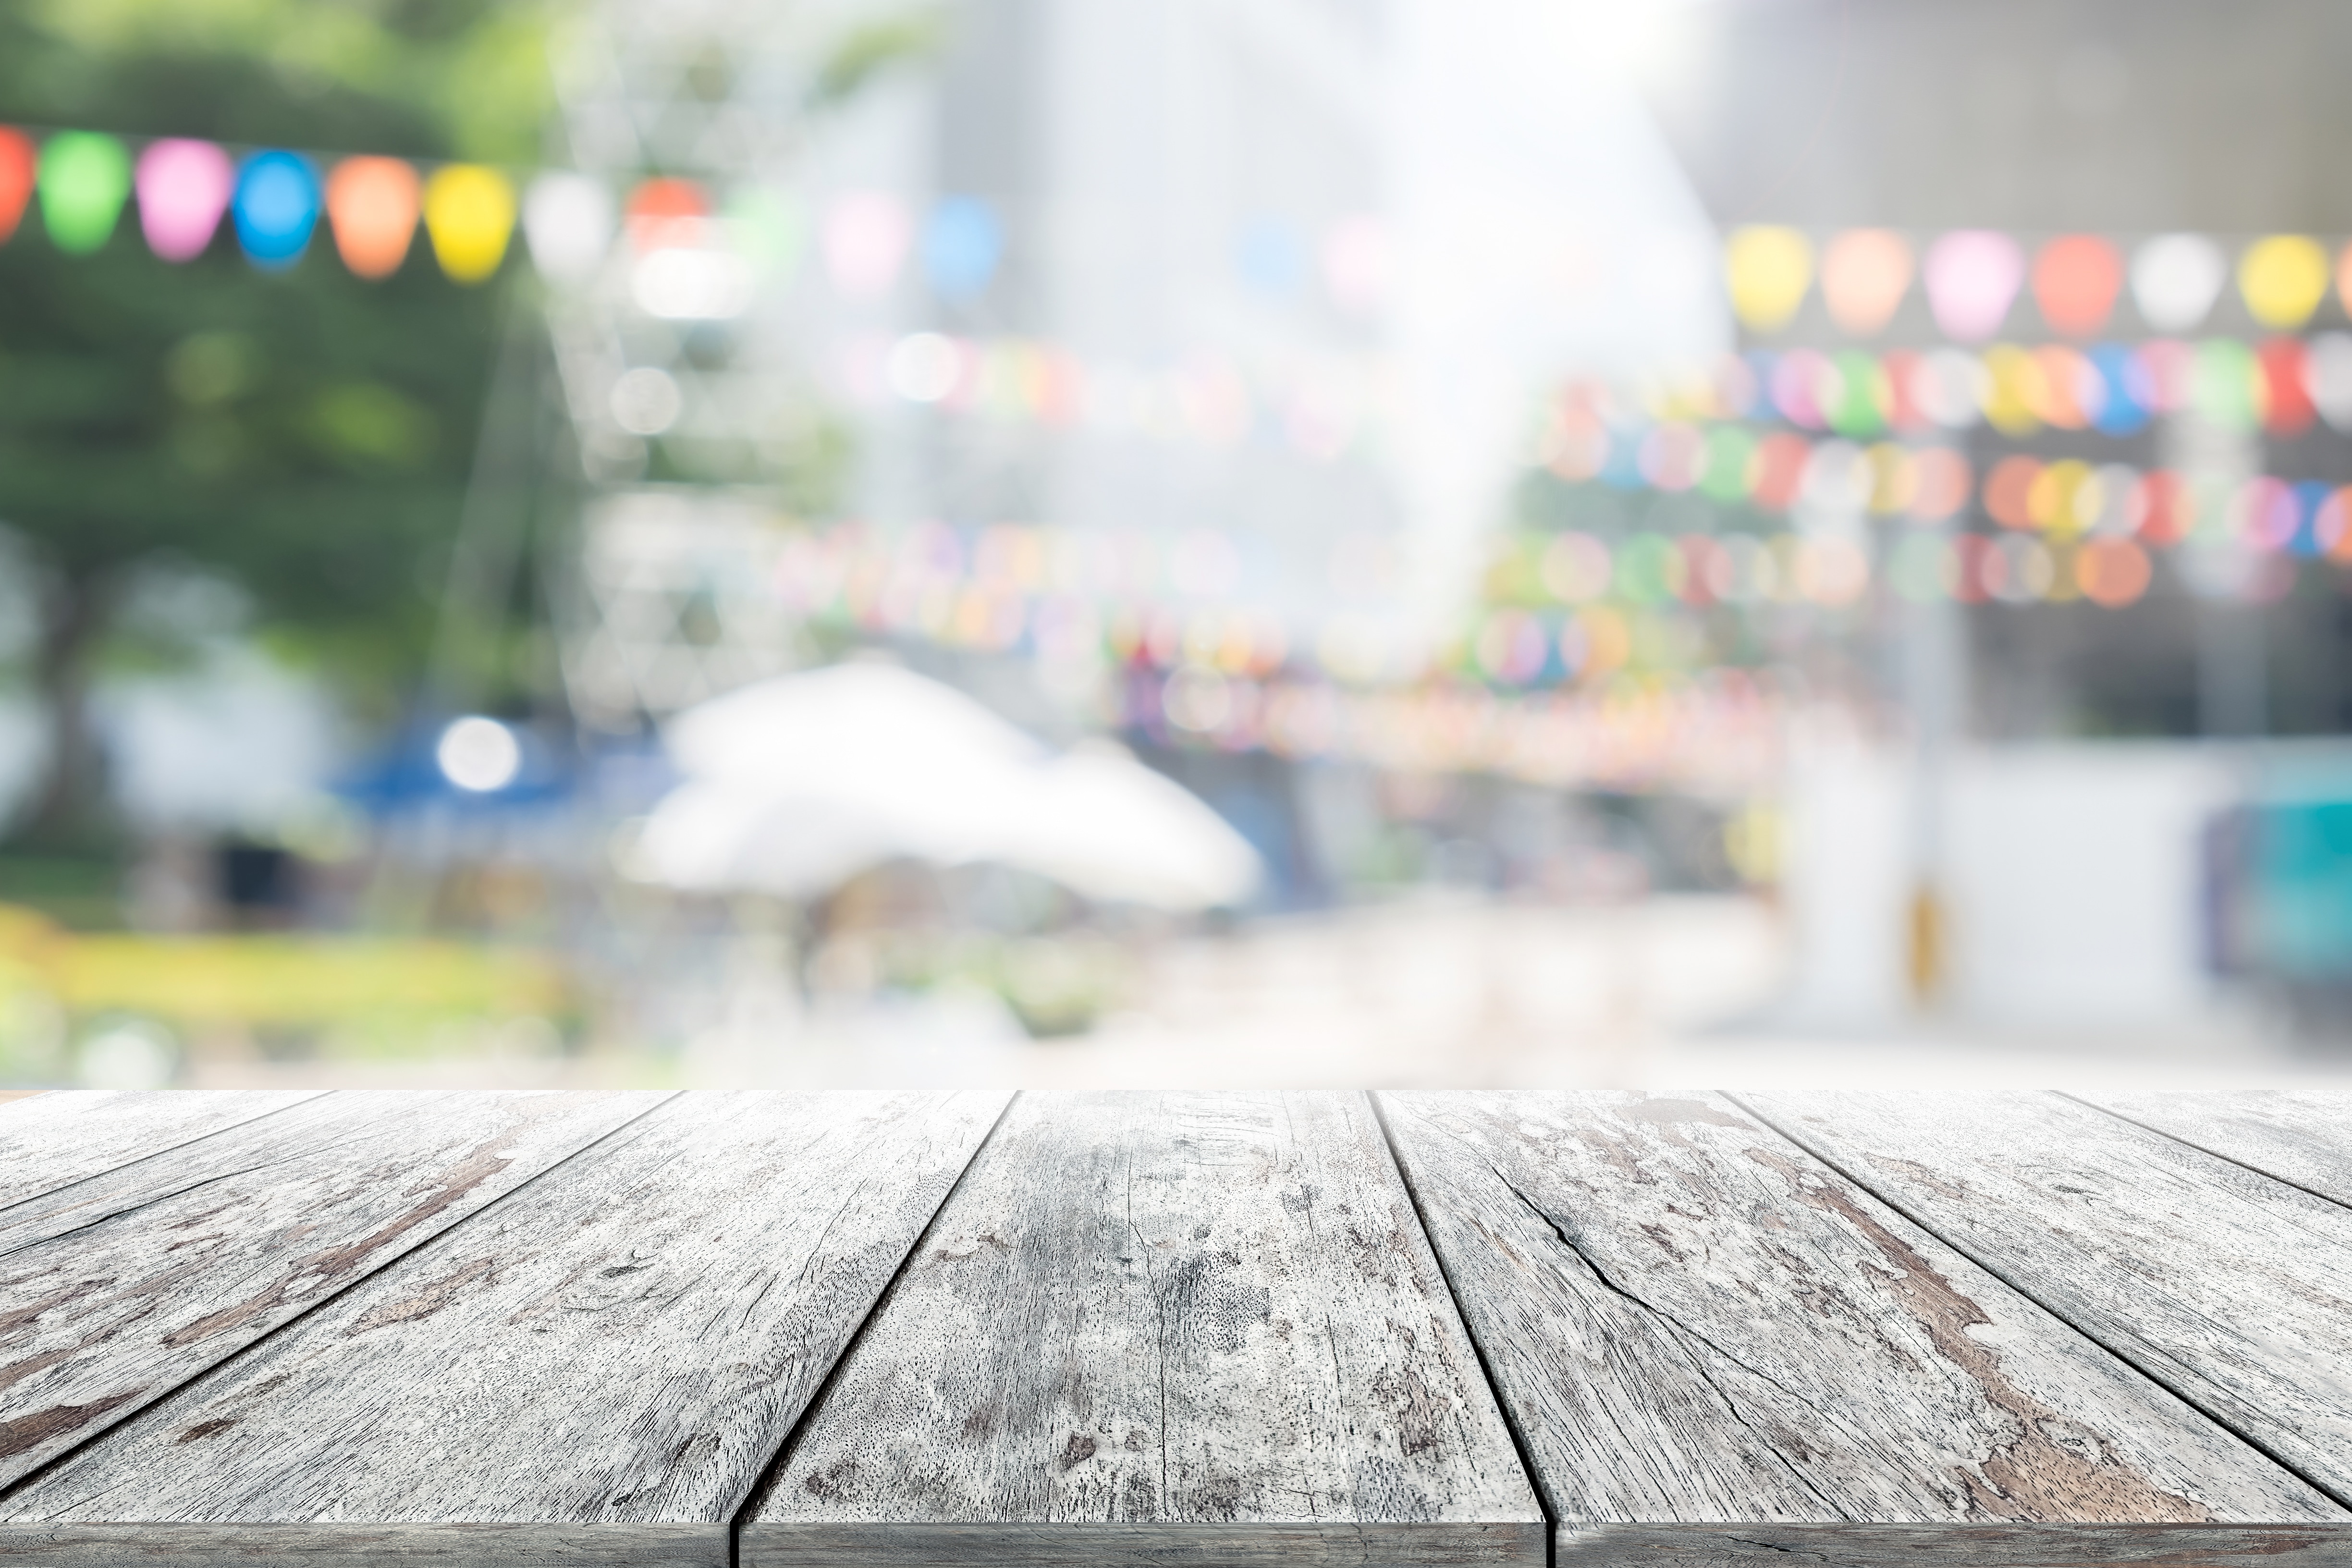 Empty wooden table with party in garden background blurred. - Mag-nificent